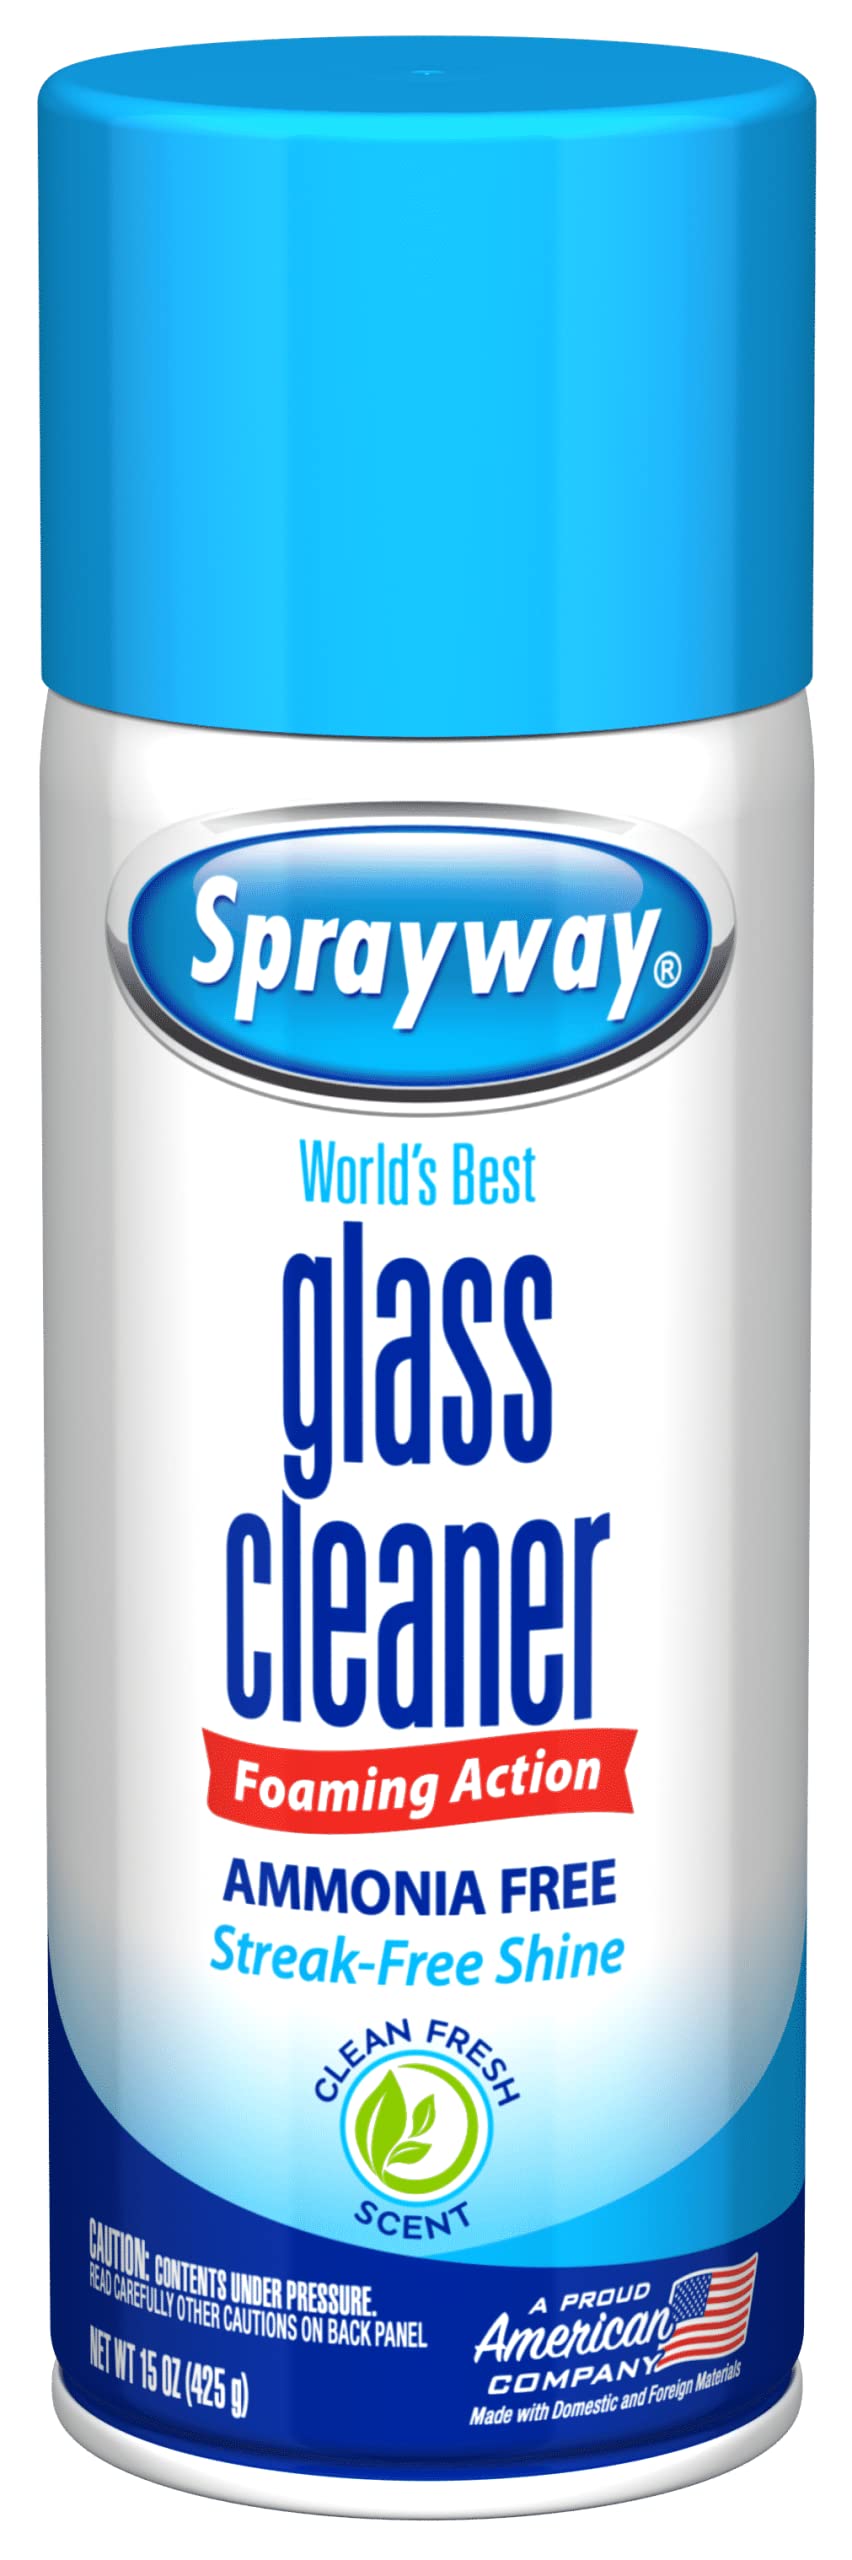 Sprayway Ammonia-Free Glass Cleaner, Foaming Action - Streakless Shine, 15  Ounce (Pack of 1)